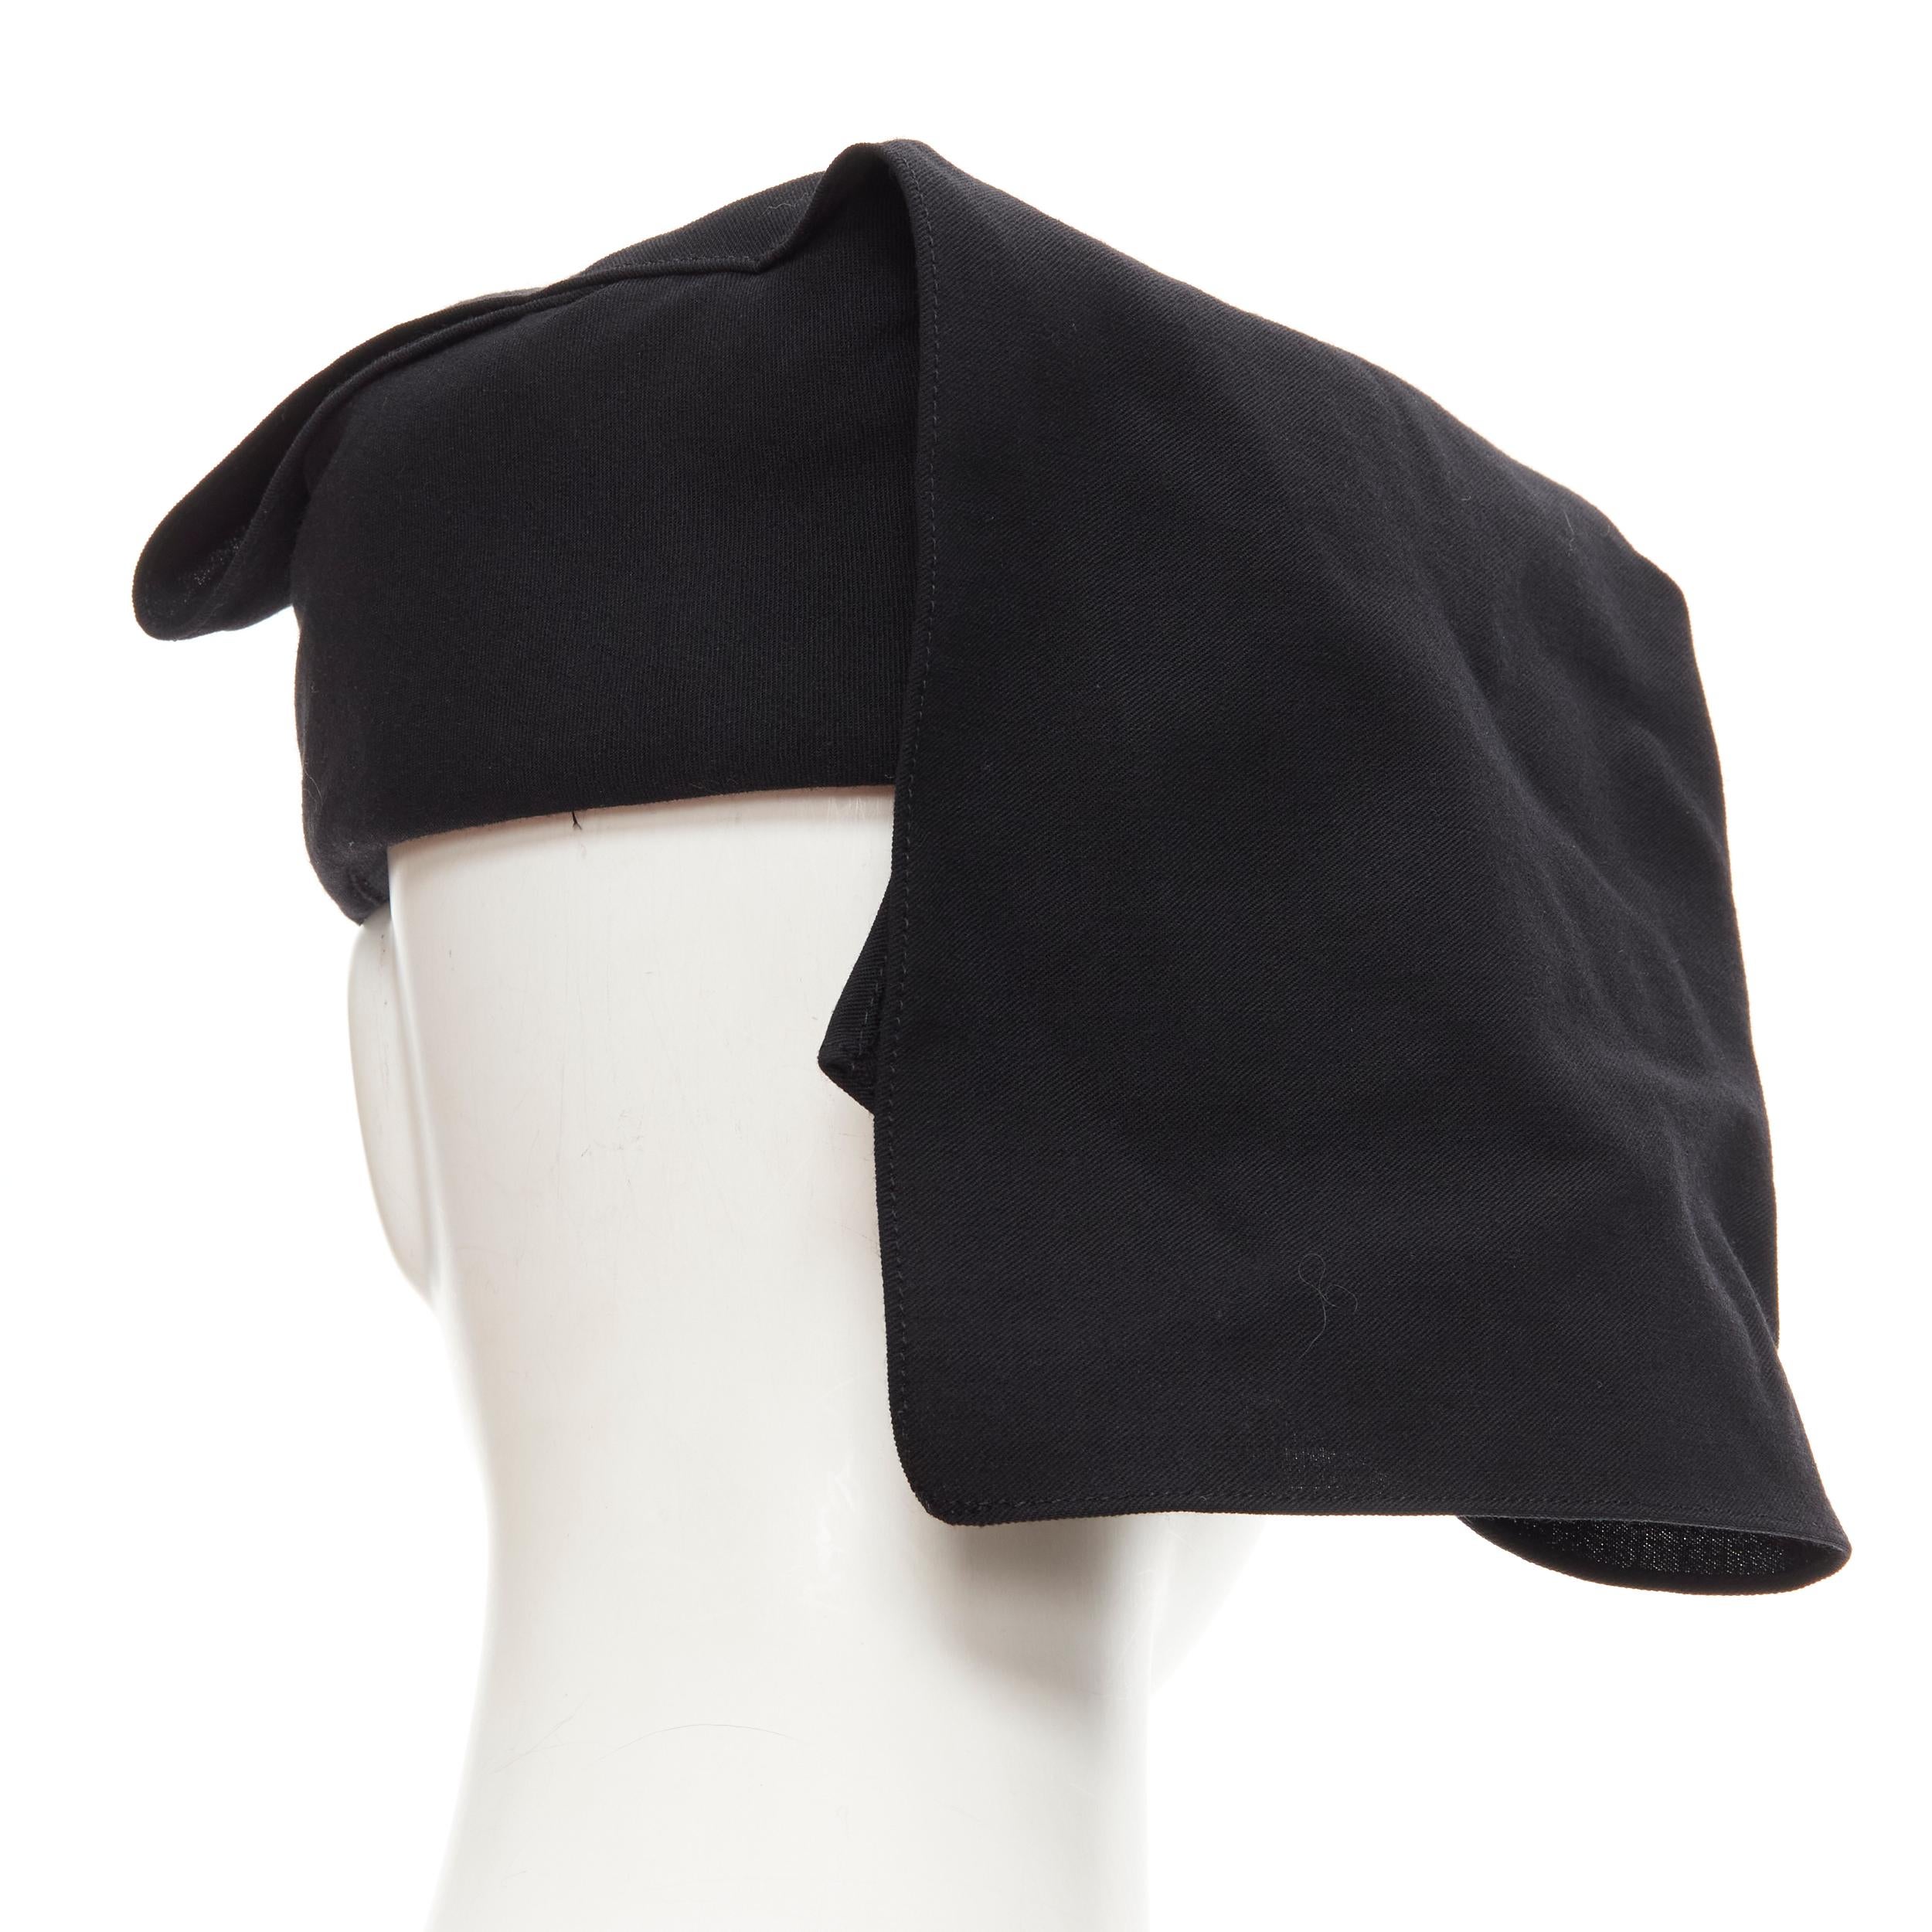 TRICOT COMME DES GARCONS Vintage black wool draped apostolnik raffia hat 
Reference: CRTI/A00658 
Brand: Comme Des Garcons 
Designer: Rei Kawakubo 
Collection: 2000's 
Material: Wool 
Color: Black 
Pattern: Solid 
Extra Detail: Raffia structured hat